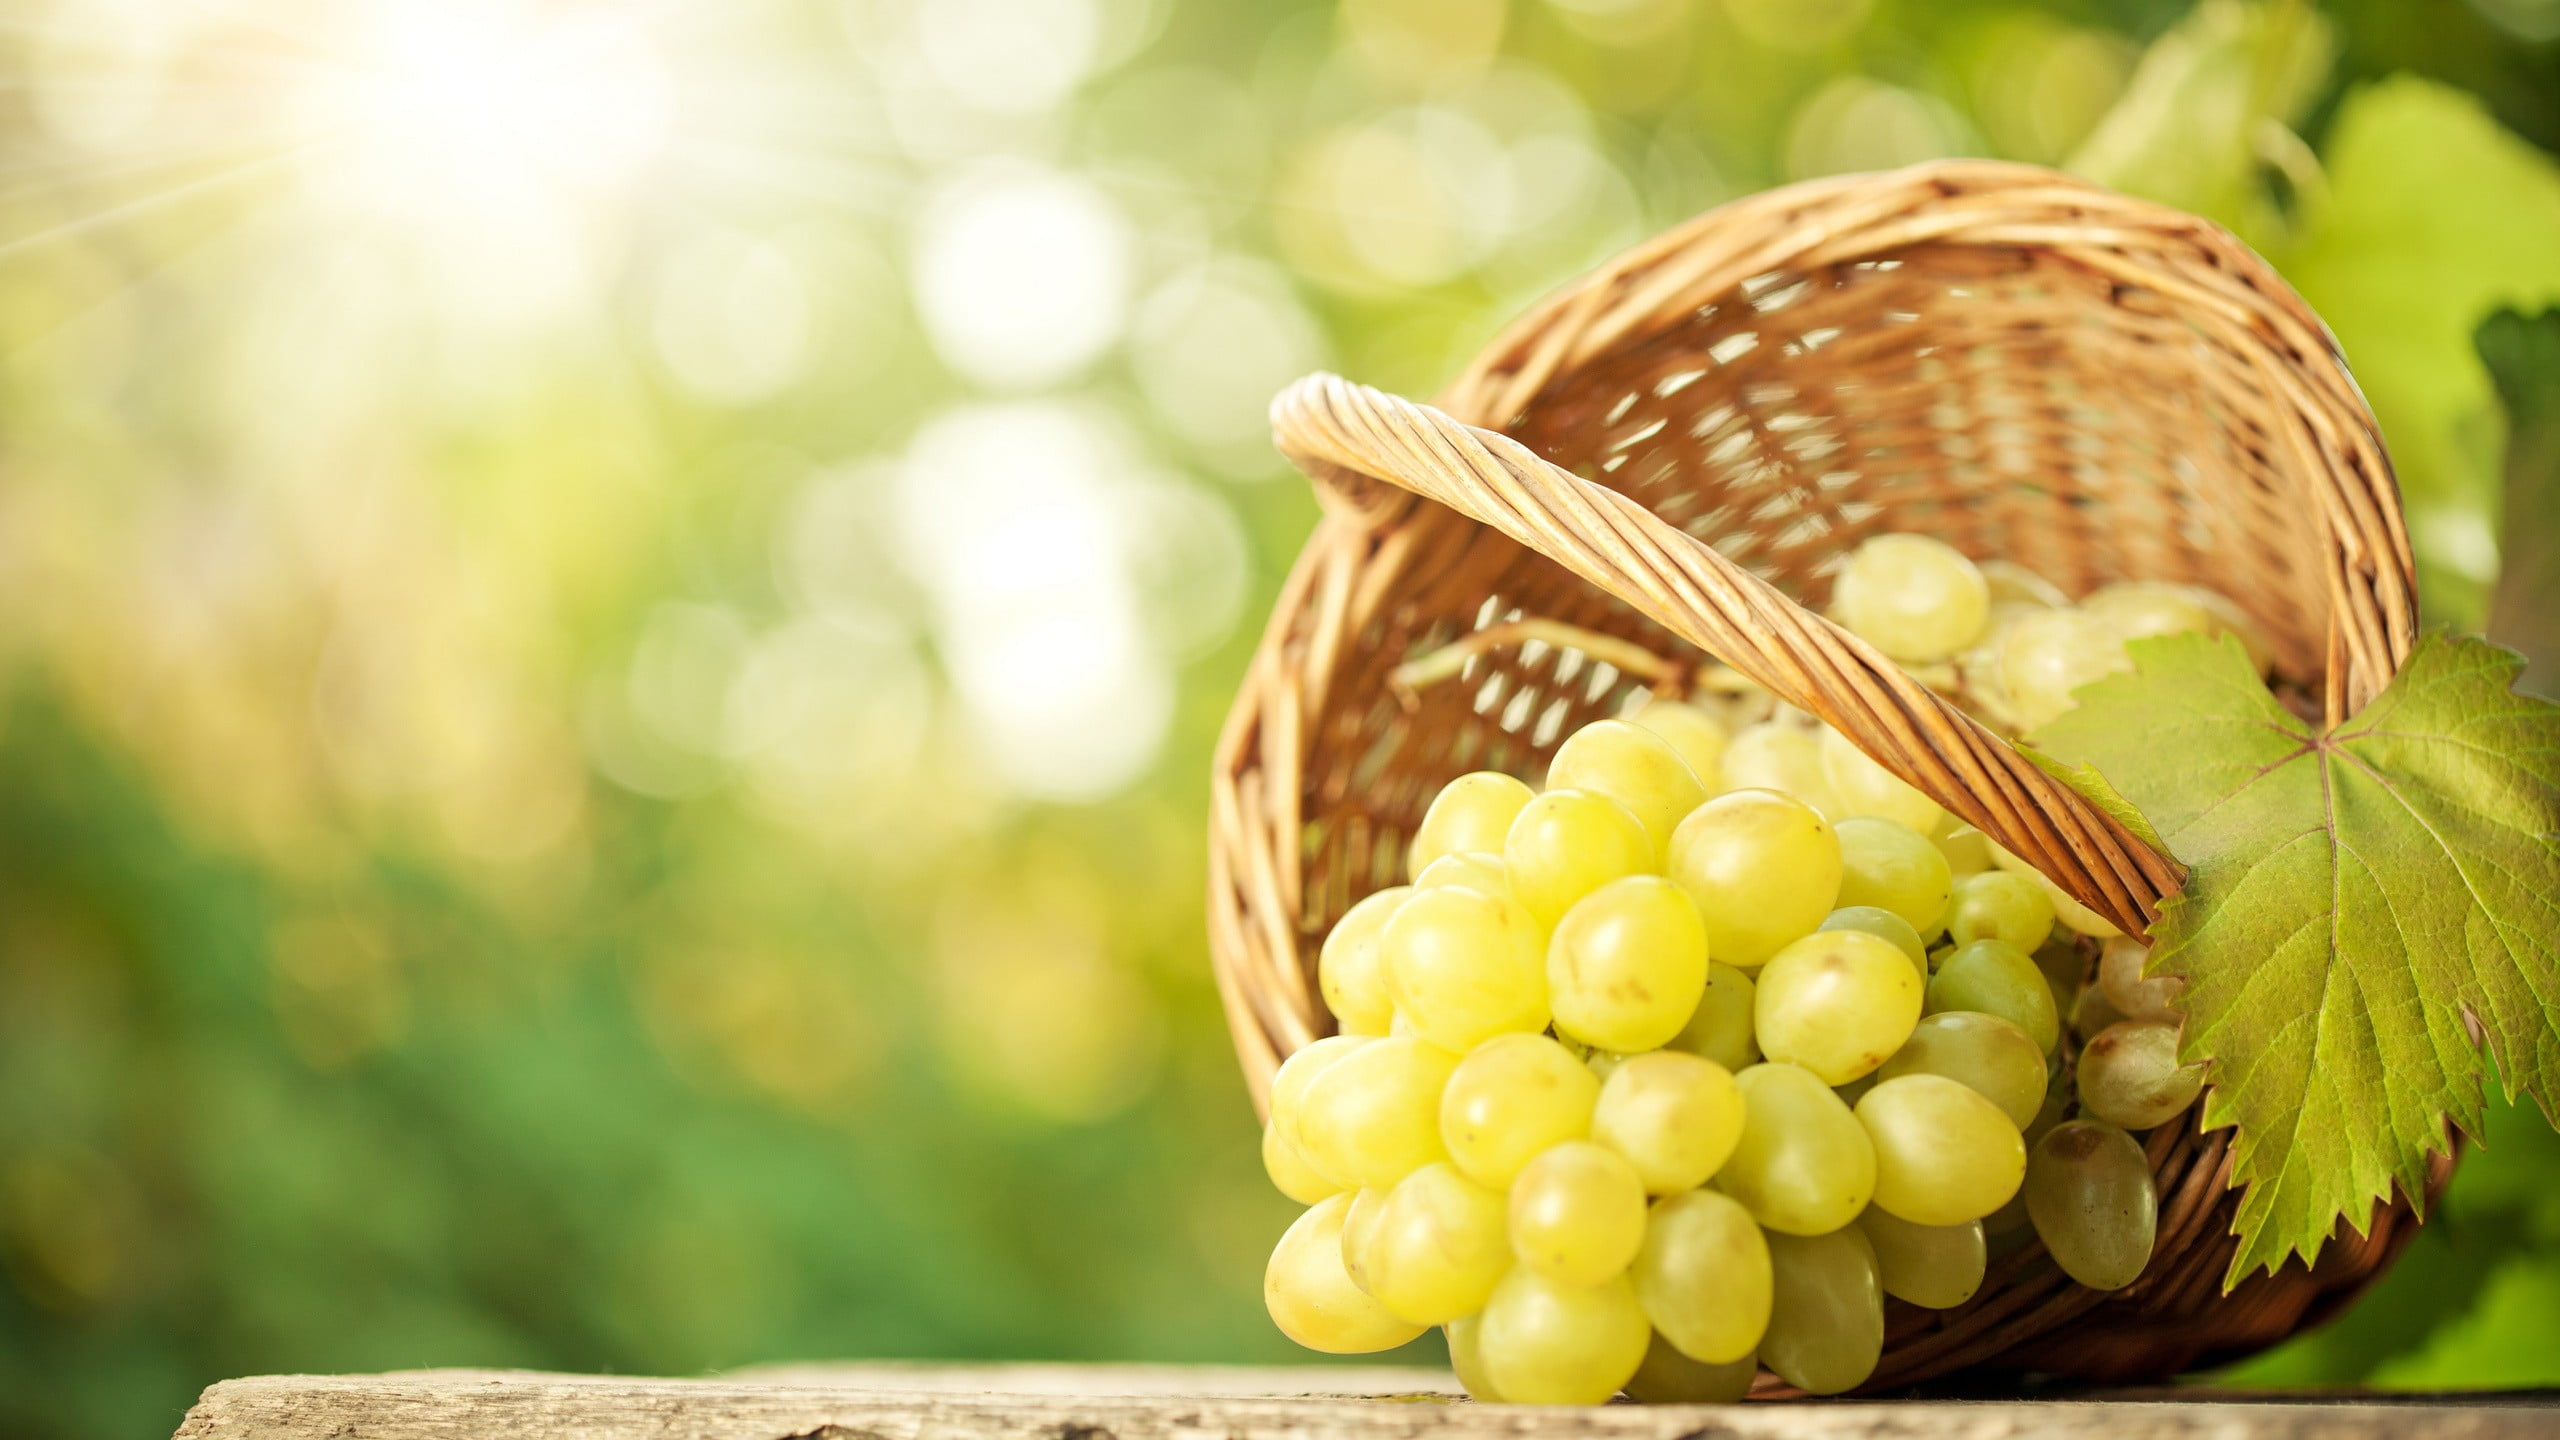 green grapes and brown wicker basket, food, food and drink, healthy eating